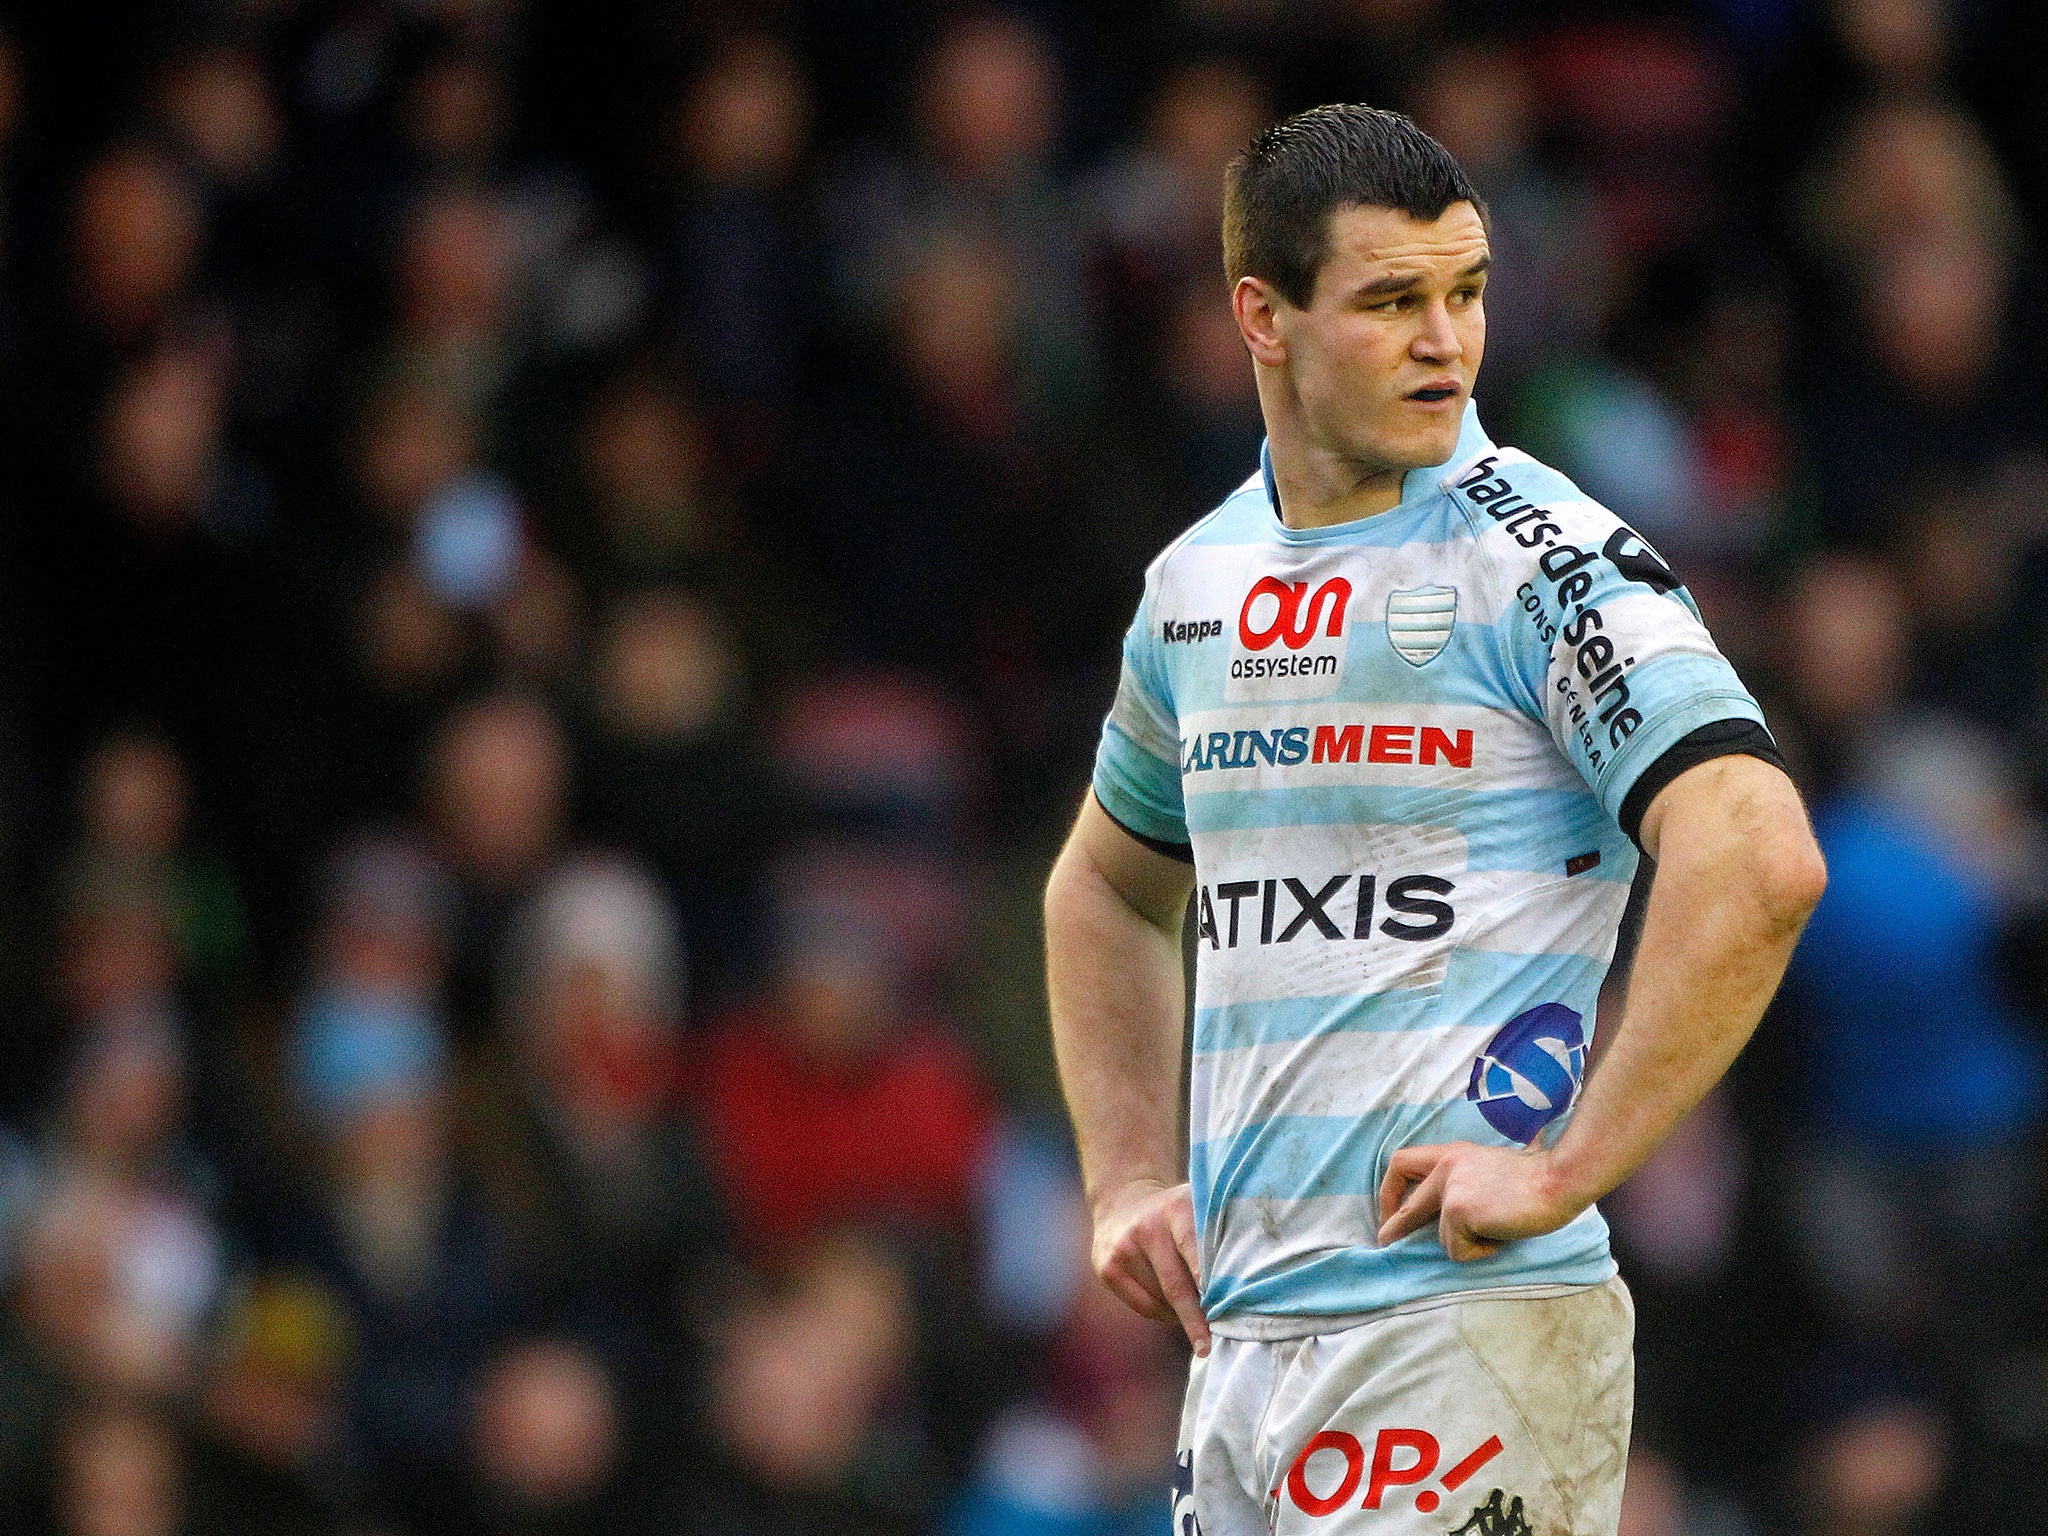 Jonathan Sexton will be the only Irish Six Nations squad member in action this weekend